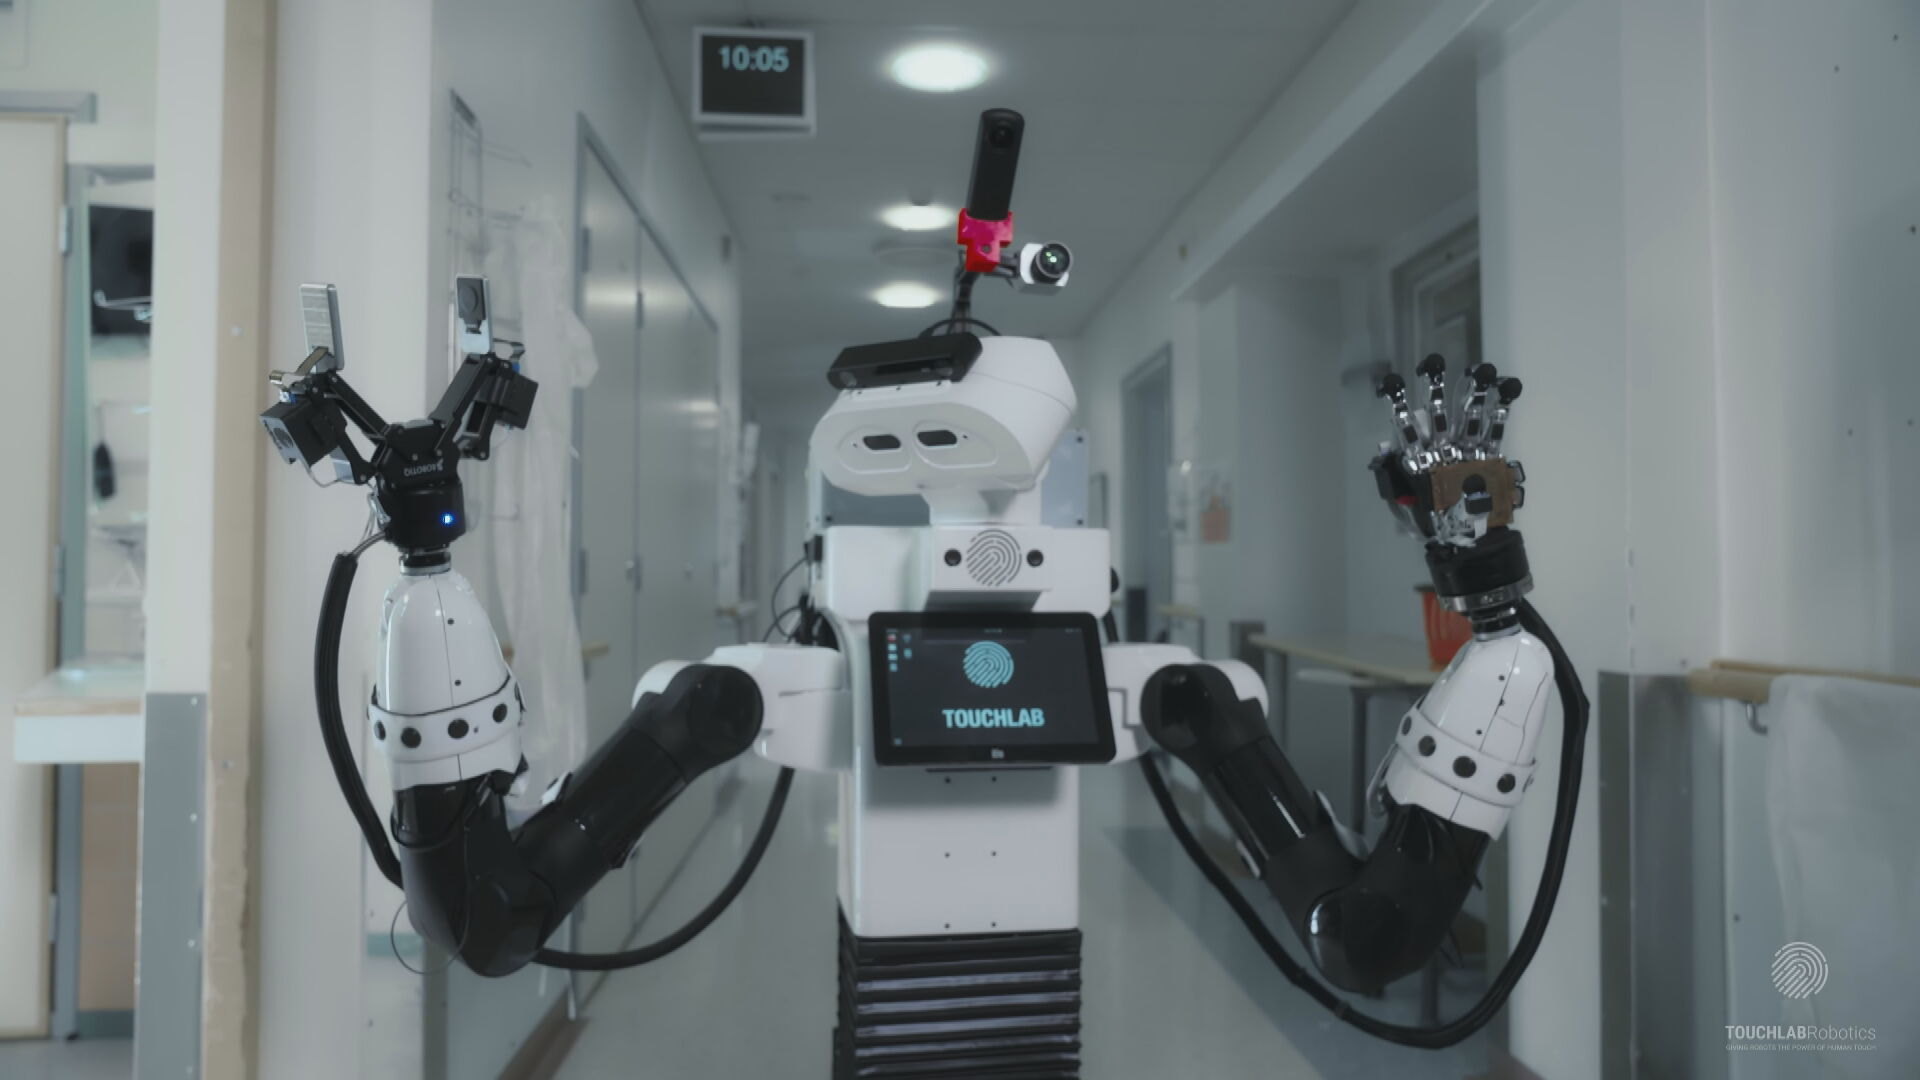 Valkky is a healthcare robot with 'a sense of touch'